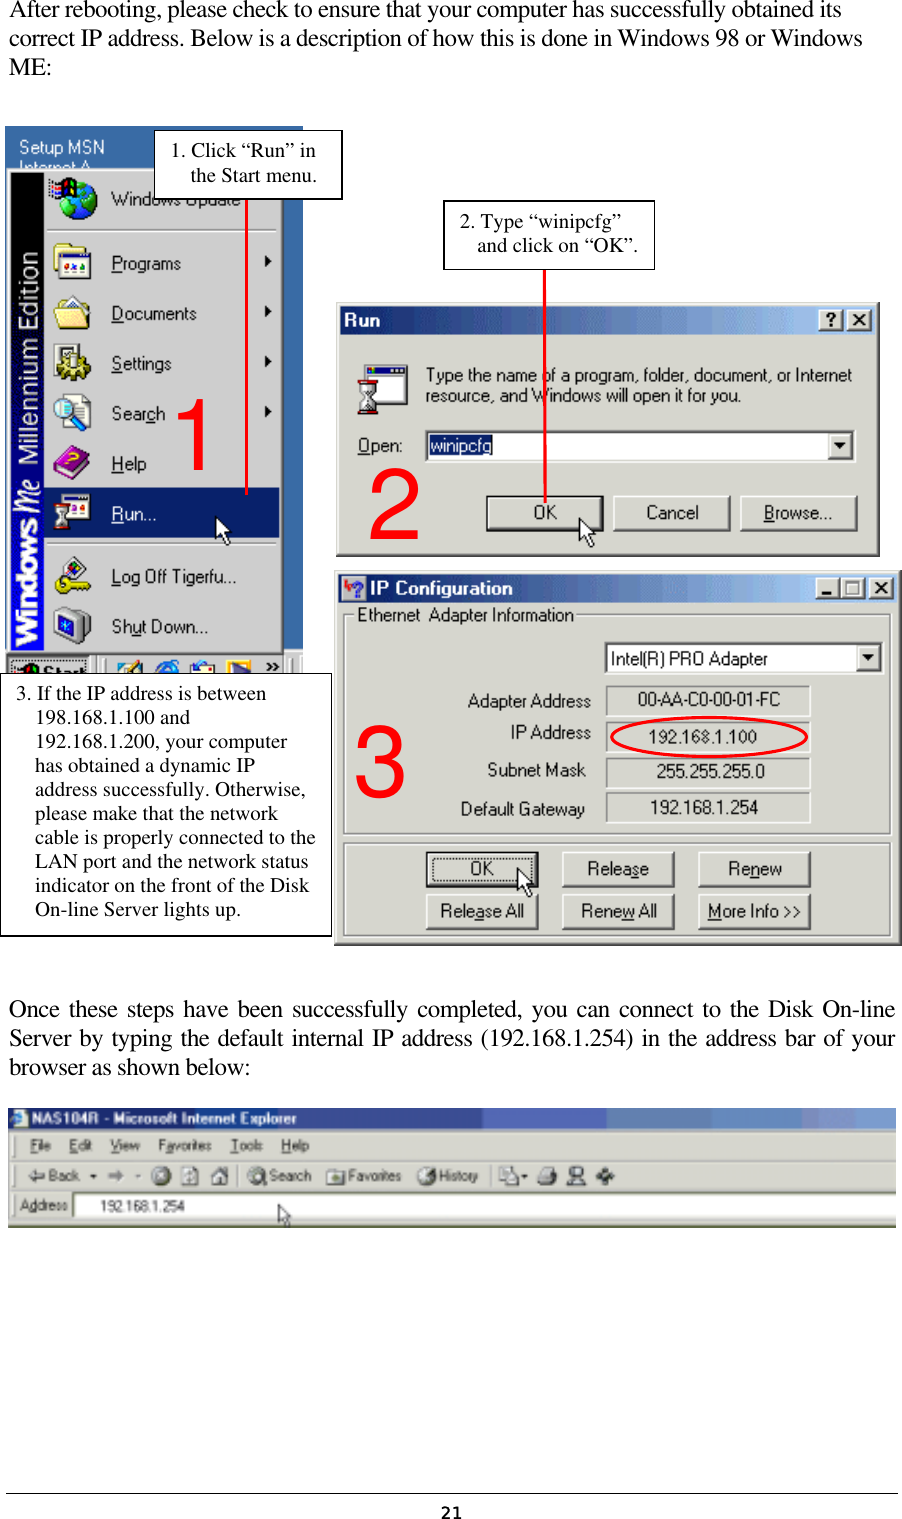   21After rebooting, please check to ensure that your computer has successfully obtained its correct IP address. Below is a description of how this is done in Windows 98 or Windows ME:                  Once these steps have been successfully completed, you can connect to the Disk On-line Server by typing the default internal IP address (192.168.1.254) in the address bar of your browser as shown below:    1. Click “Run” in the Start menu. 2. Type “winipcfg” and click on “OK”.3. If the IP address is between 198.168.1.100 and 192.168.1.200, your computer has obtained a dynamic IP address successfully. Otherwise, please make that the network cable is properly connected to theLAN port and the network status indicator on the front of the Disk On-line Server lights up. 2 1 3 